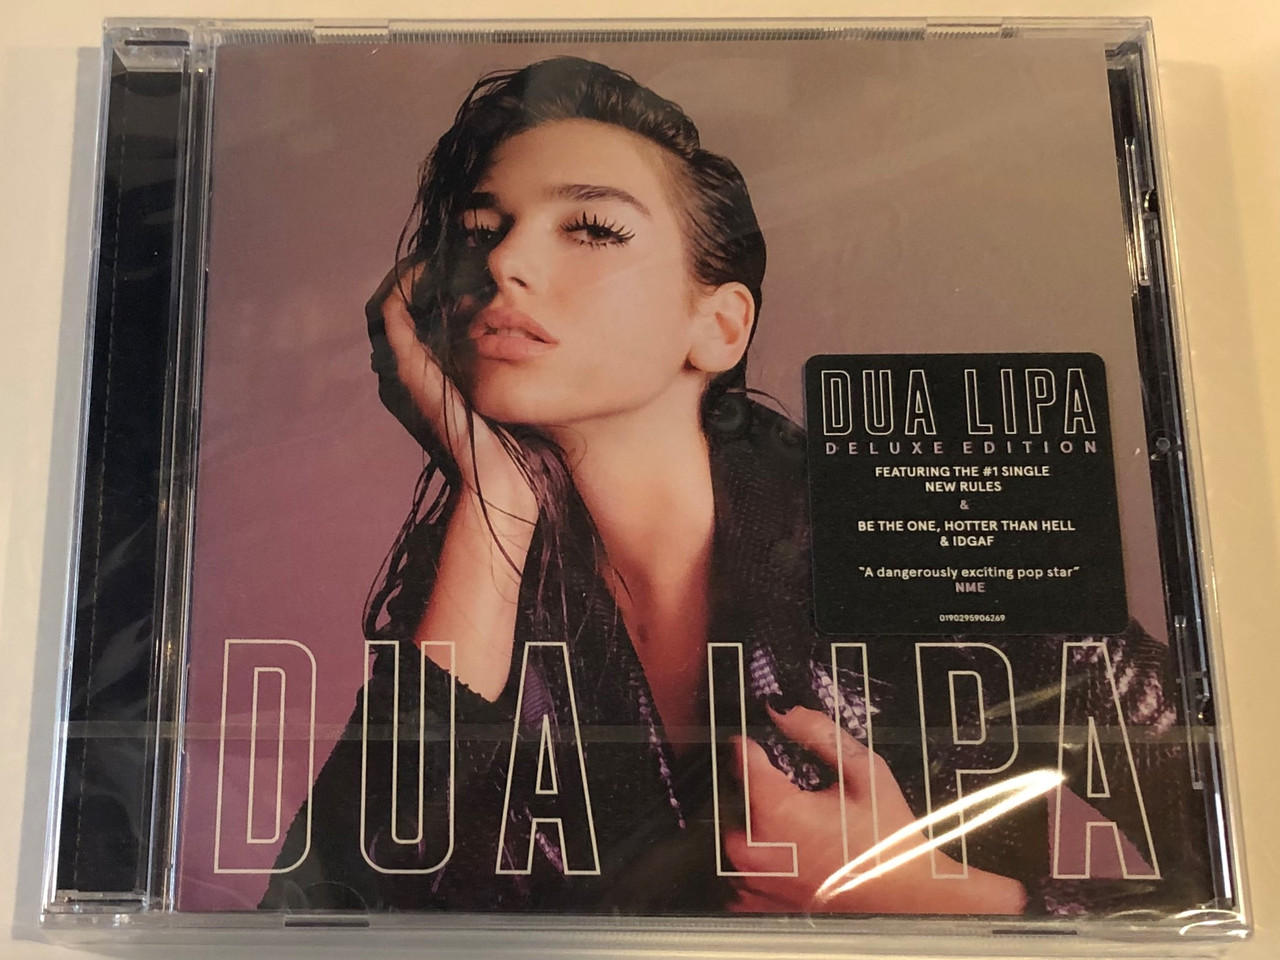 Dua Lipa ‎/ Deluxe Edition / Featuring The #1 Single New Rules & Be The  One, Hotter Than Hell & IDGAF, ''A dangerously exciting pop star'' NME /  Warner Bros. Records ‎Audio